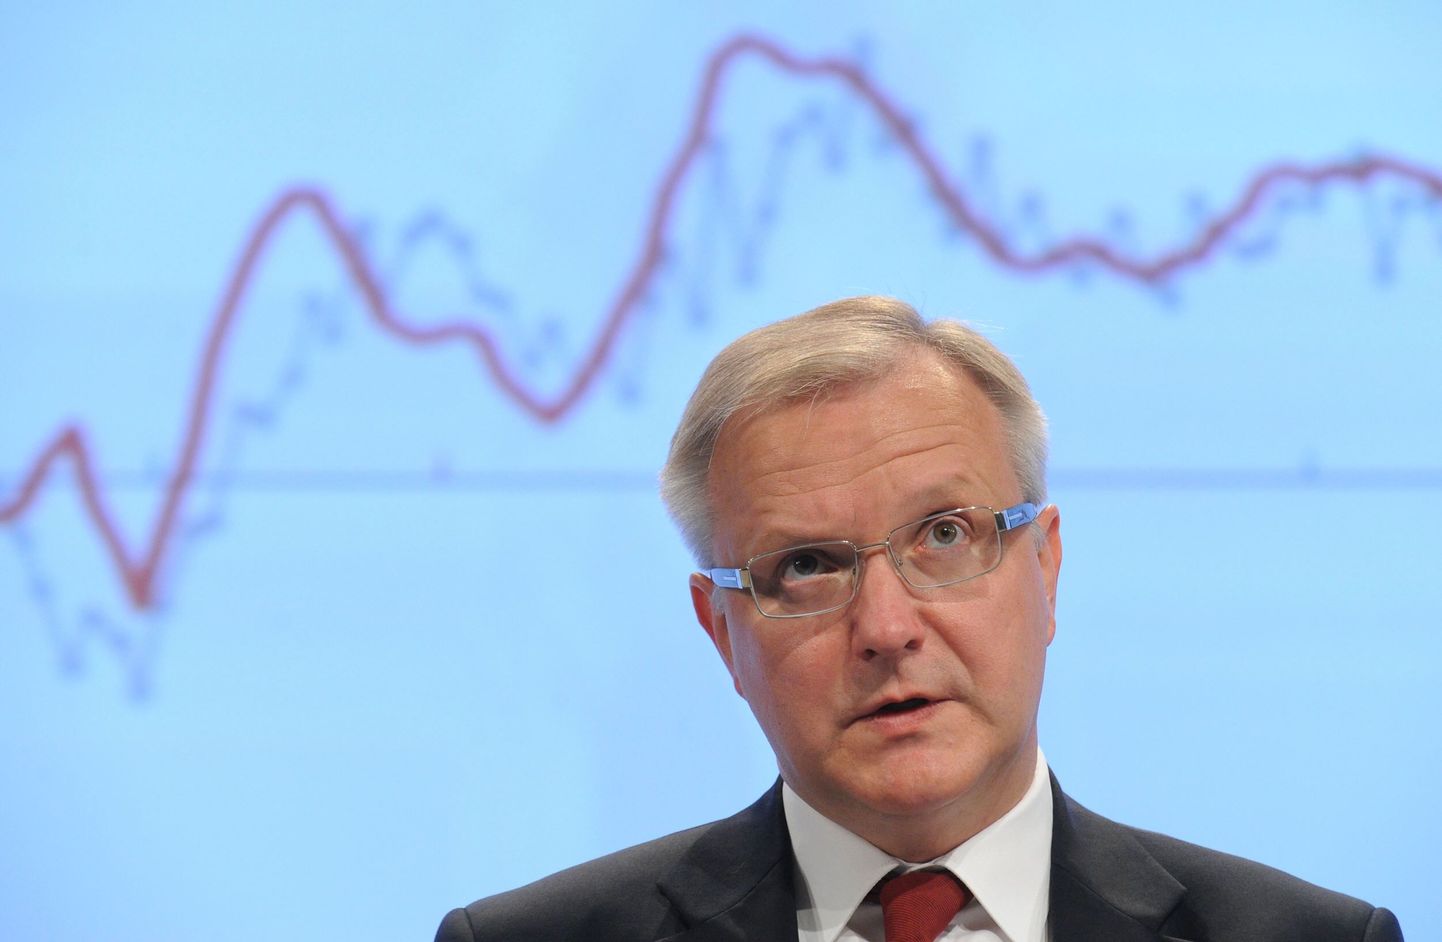 EU commissioner for Economic and Monetary Affairs Olli Rehn gives gestures during a press conference on the Autumn economic forecast at the EU headquarters in Brussels on december 29, 2010. The European Union admitted "concern" at the power of financial markets to sow "turbulence" undermining economic recovery and create further policy-making "tensions."
AFP PHOTO/JOHN THYS